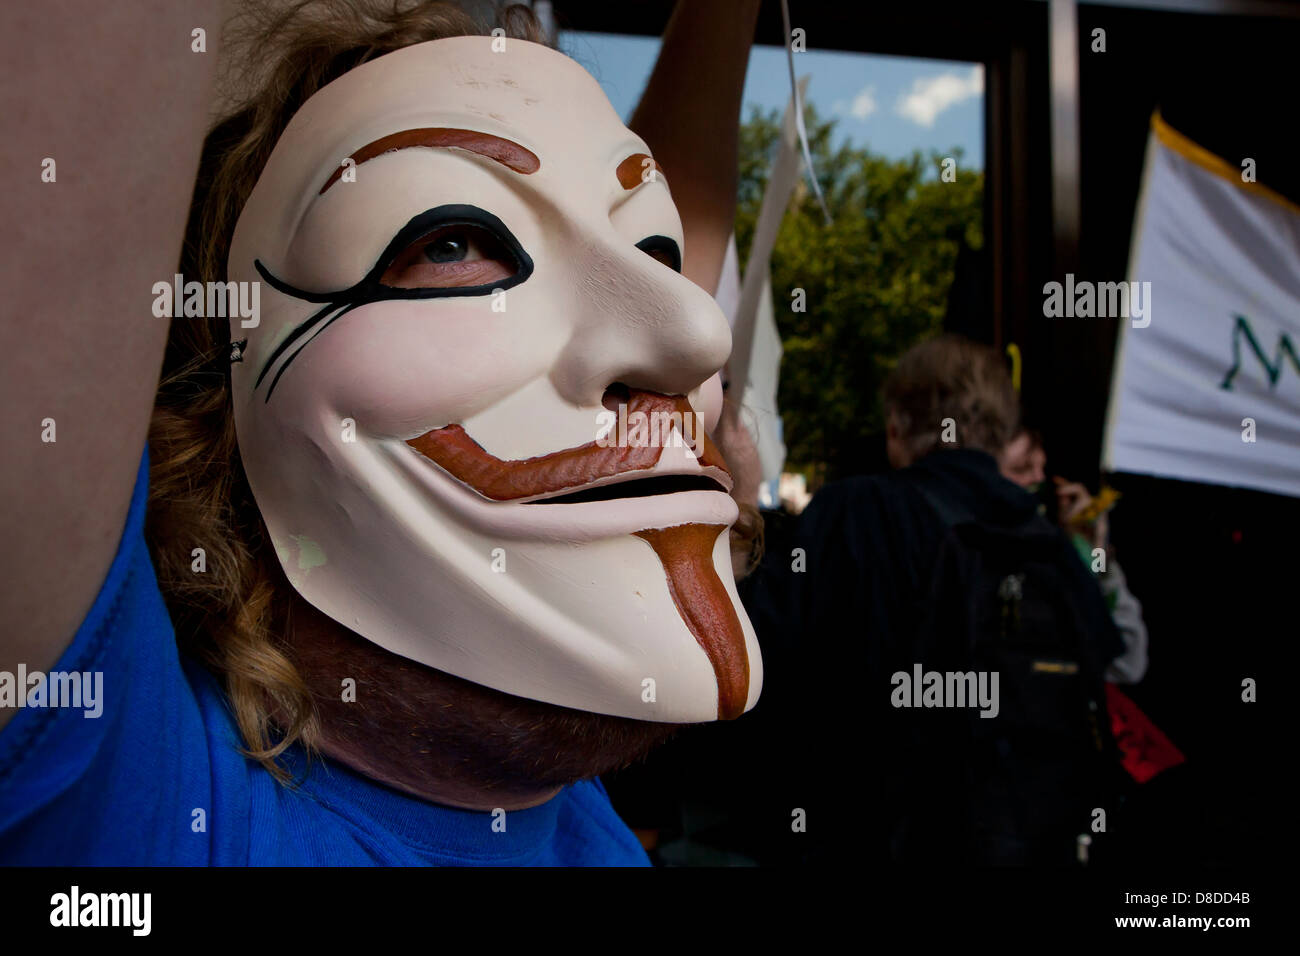 Man wearing a Guy Fawkes mask Stock Photo